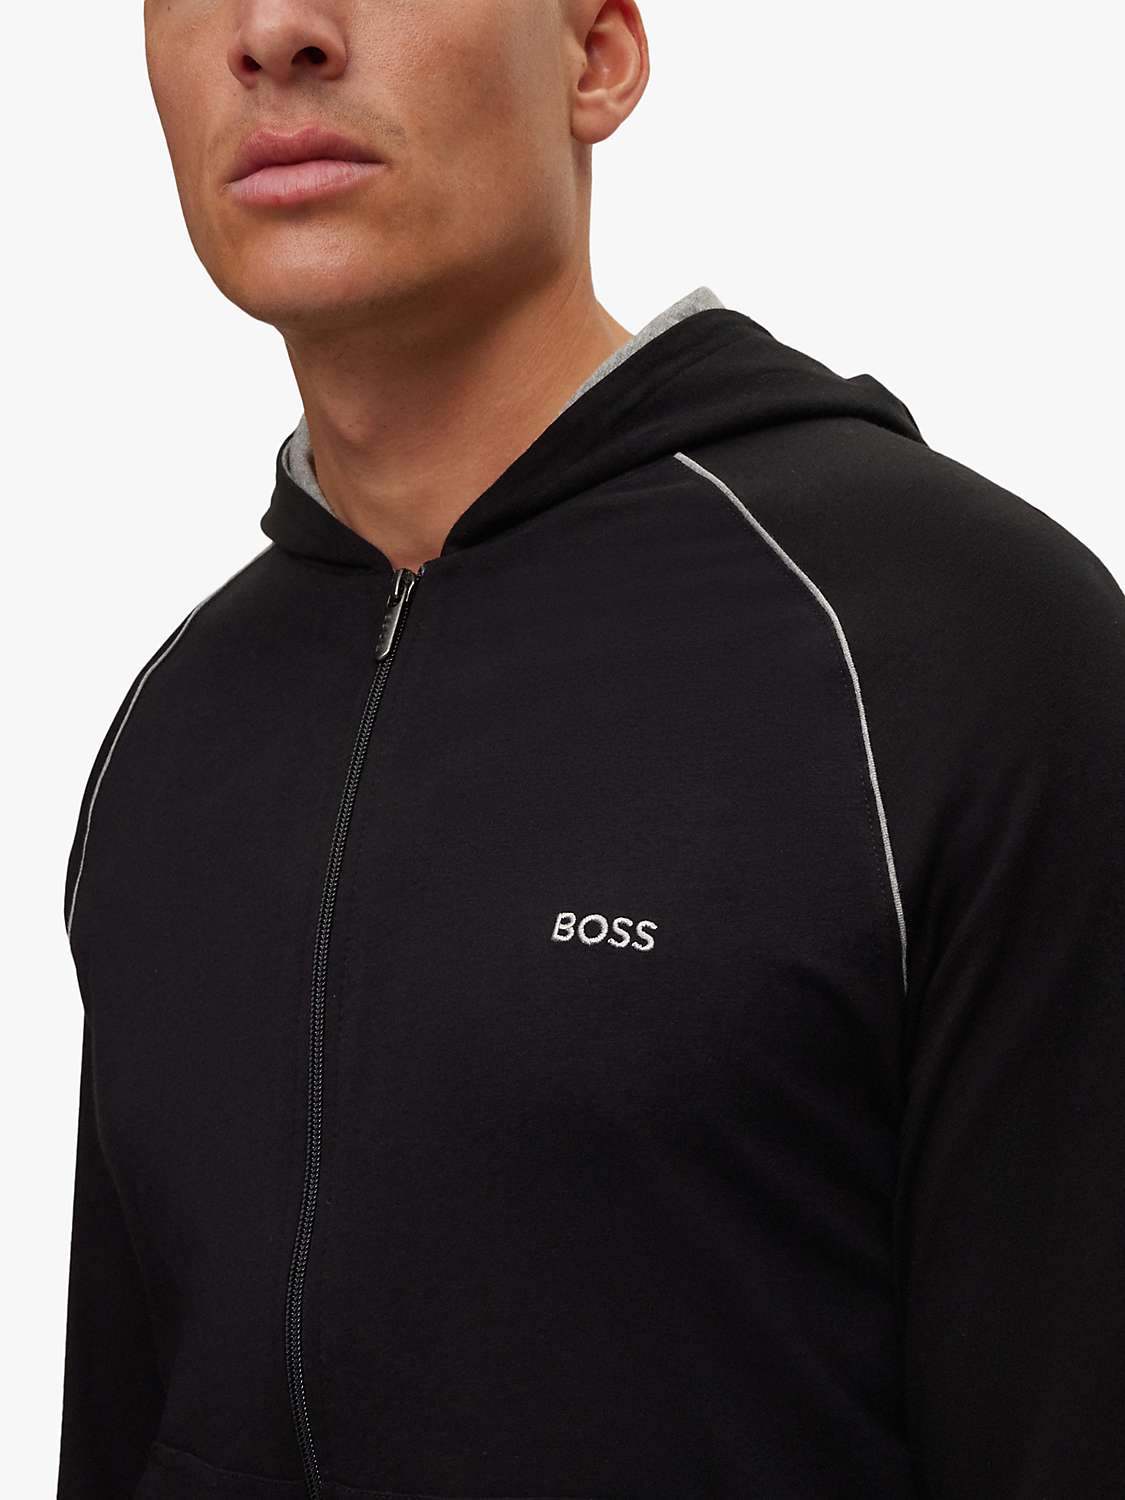 Buy BOSS Mix and Match Lounge Top Online at johnlewis.com